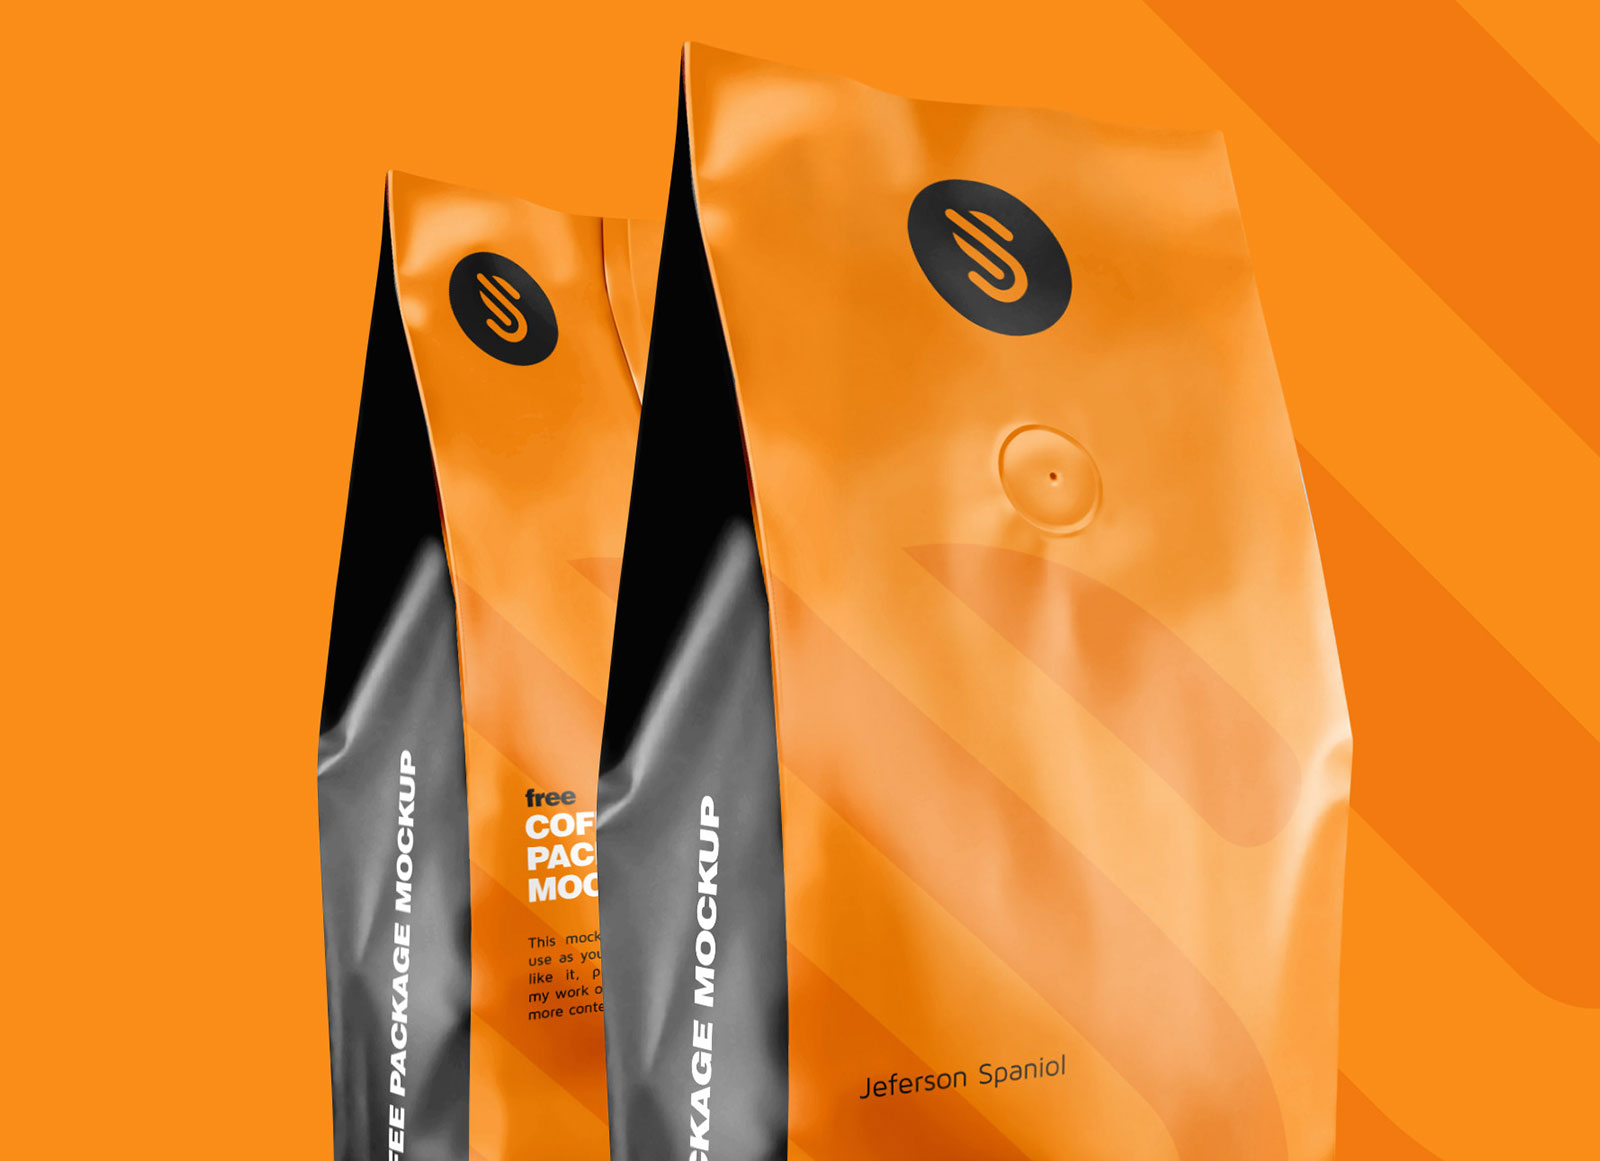 Download Free Aluminium Coffee Standing Pouch Packaging Mockup PSD - Good Mockups